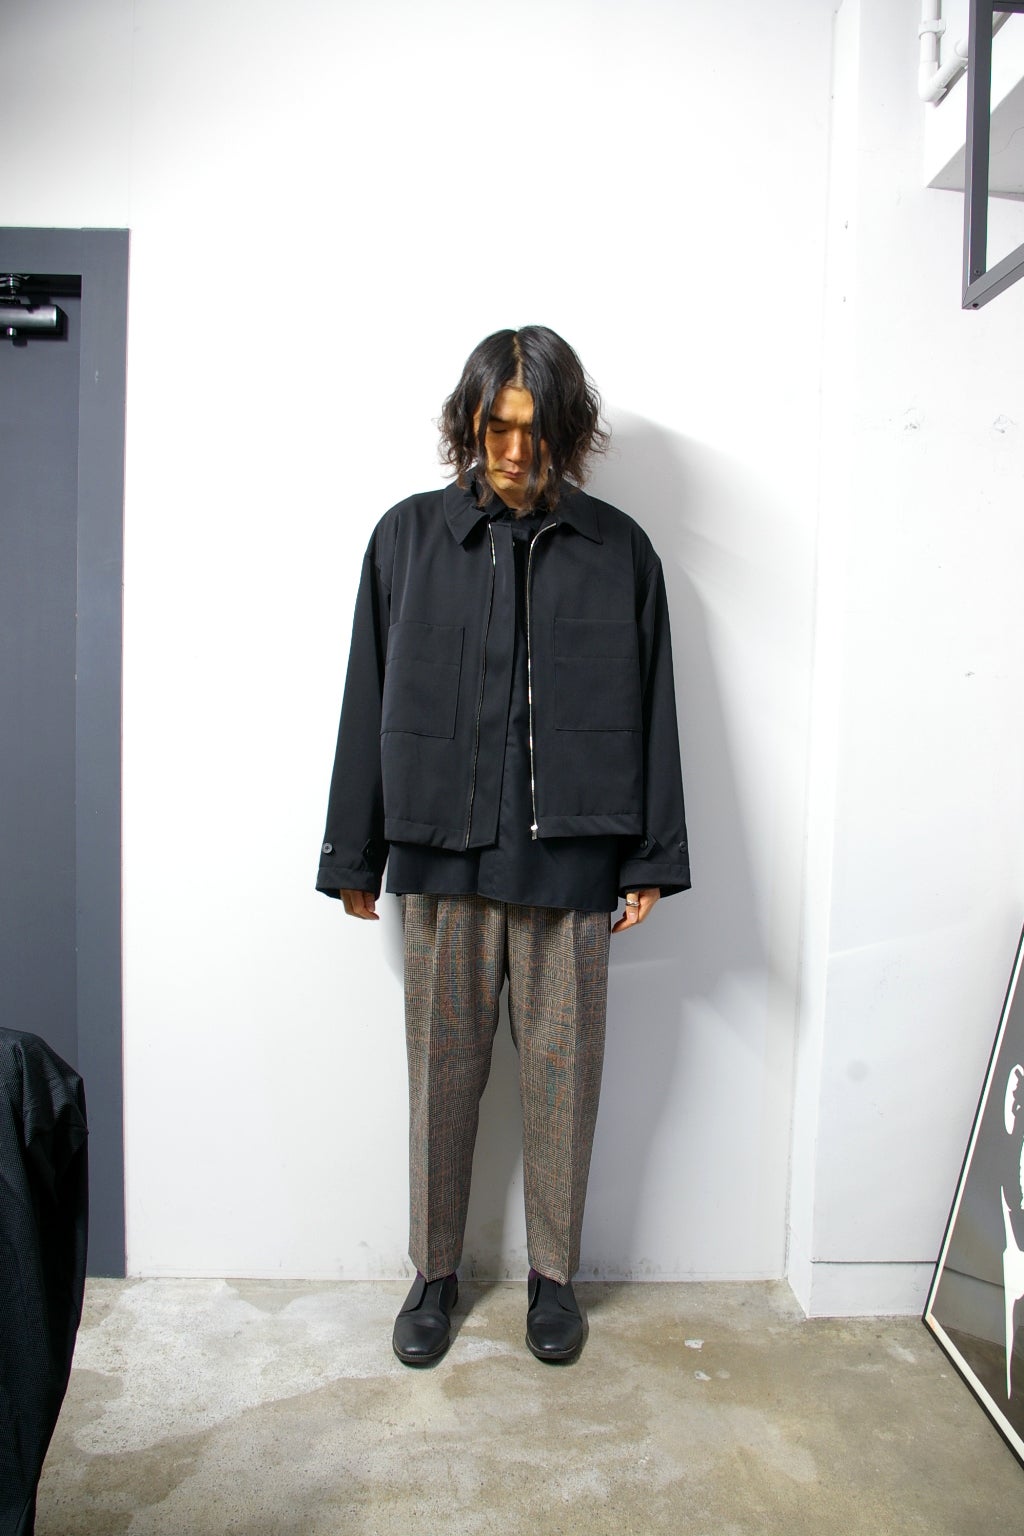 stein(シュタイン)/OVER SLEEVE DRIZZLER JACKET/Black 通販 取り扱い